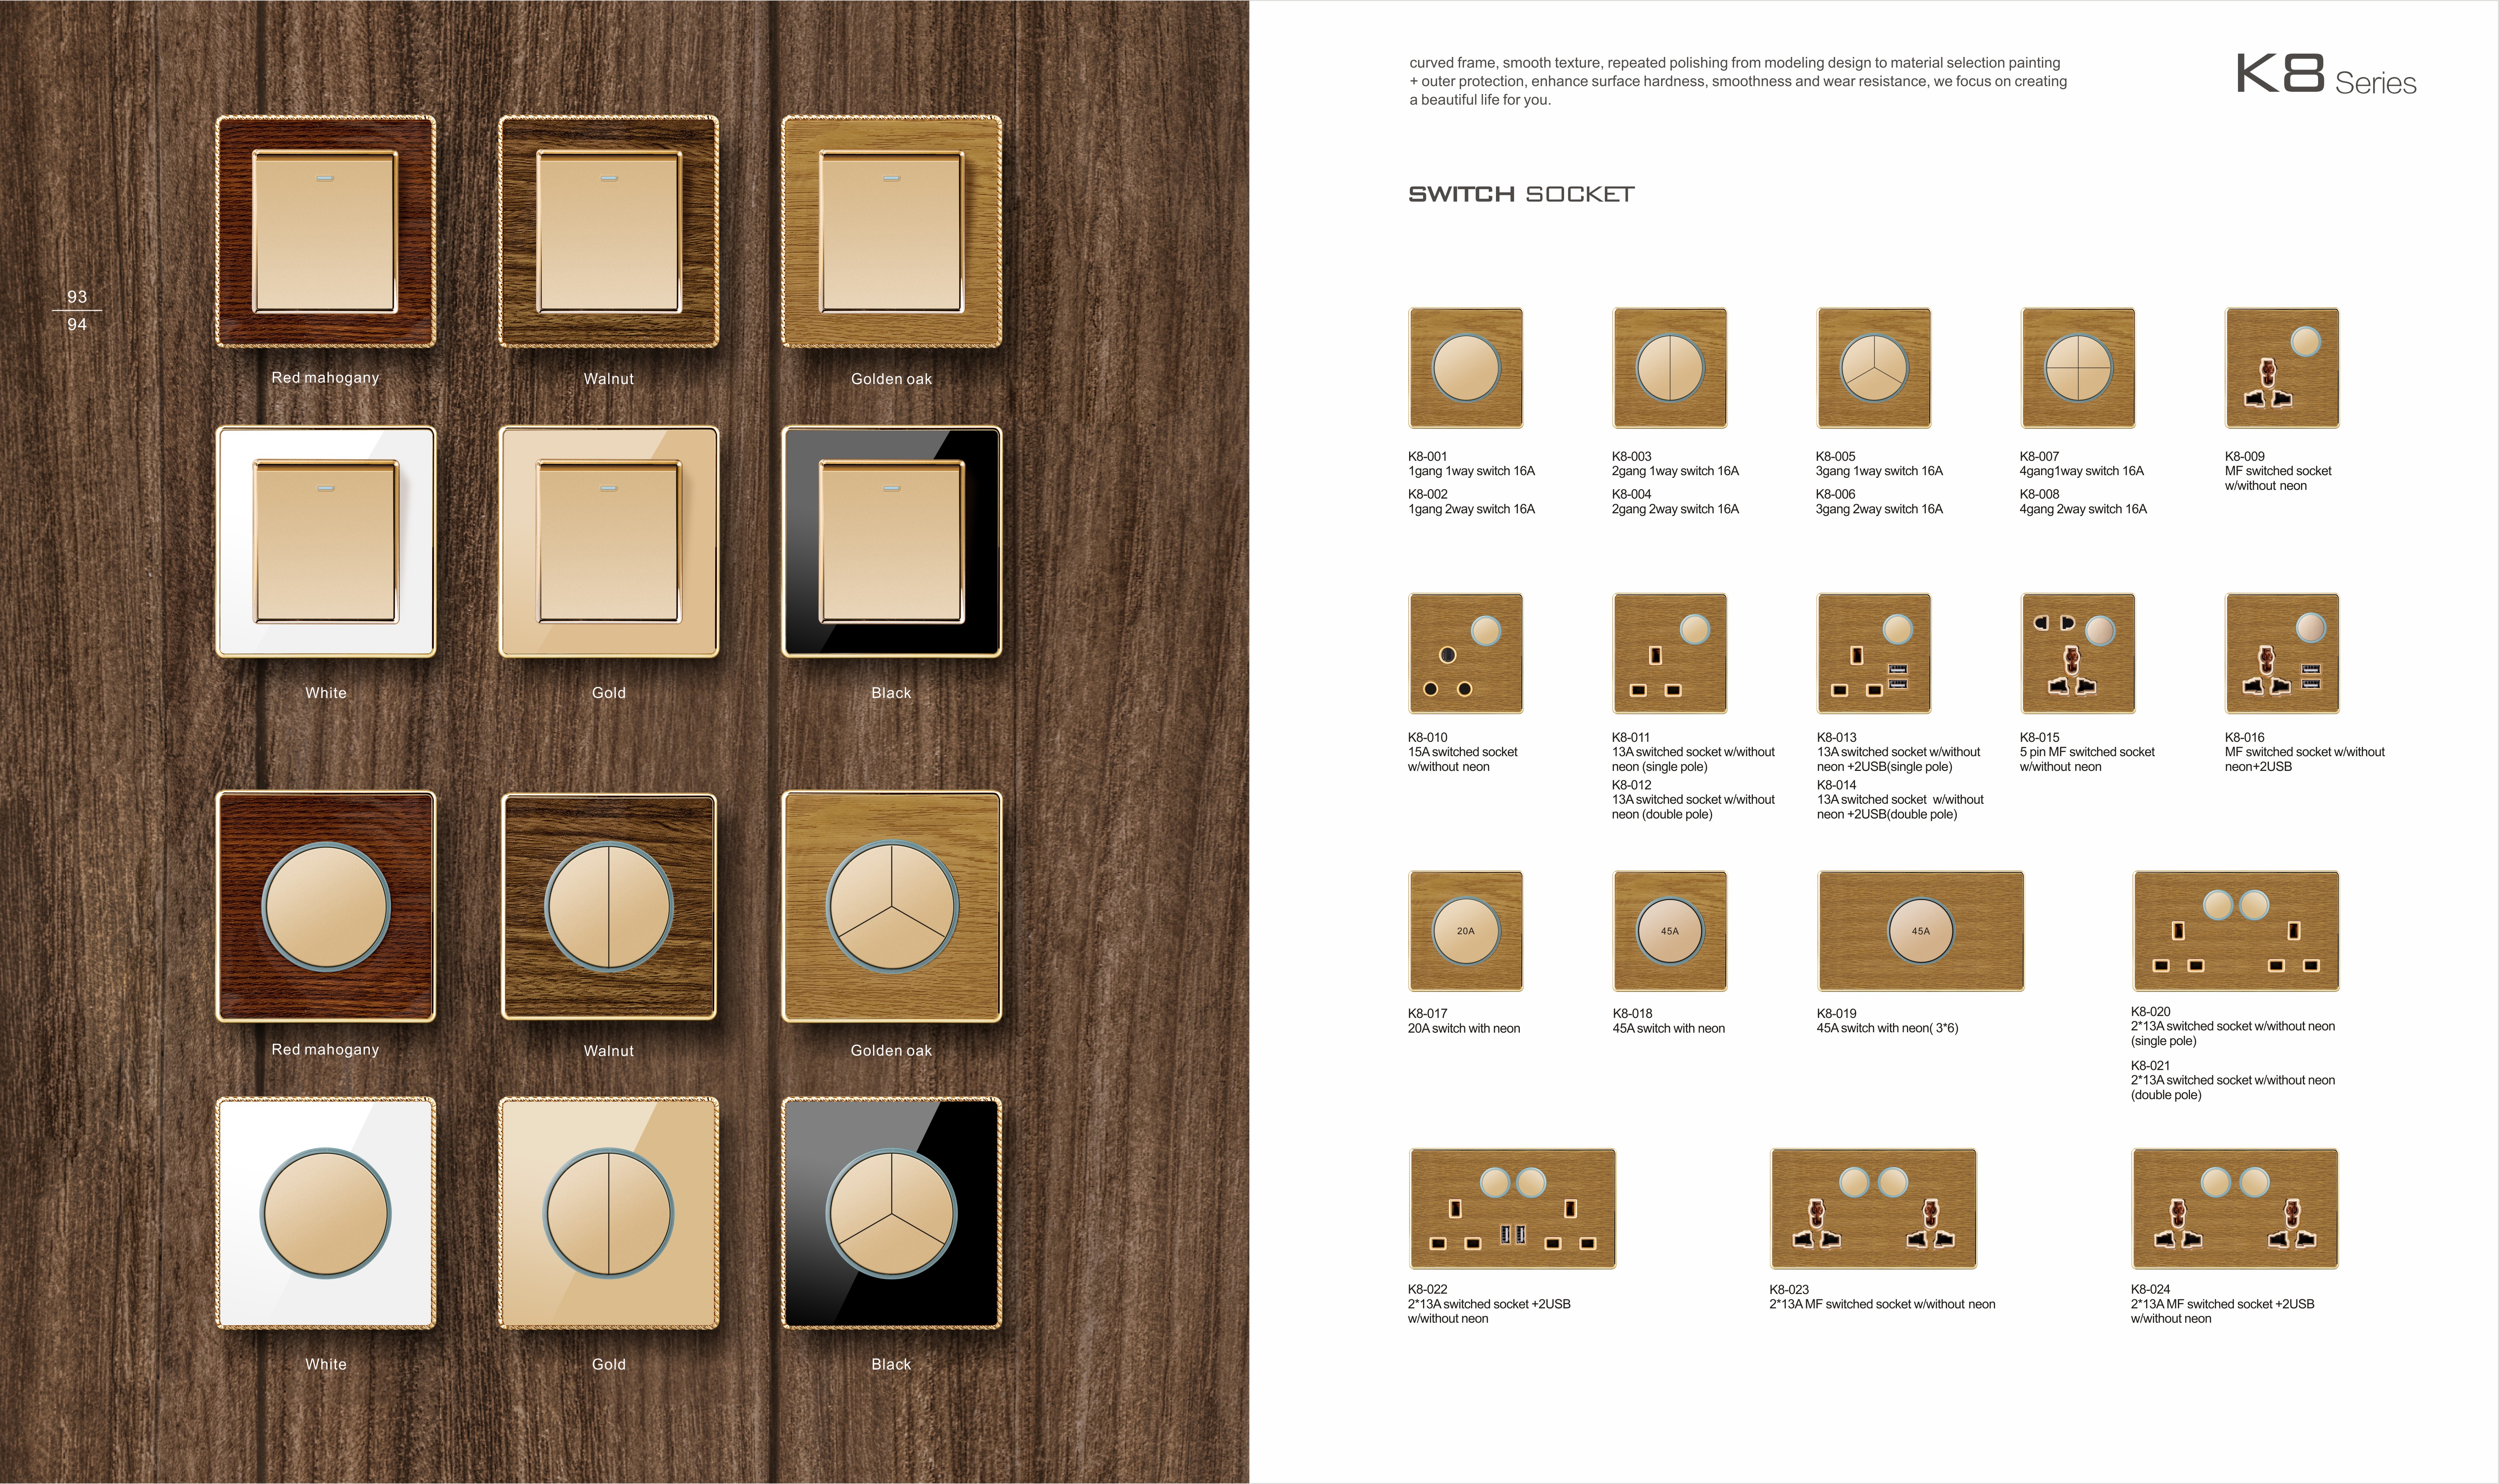 K8 Series Acrylic Wooden 4G 16A 250V Light Electric Wall Switch Socket 86*86cm PC Material with Chrome Frame Home Switches Twist Pattern